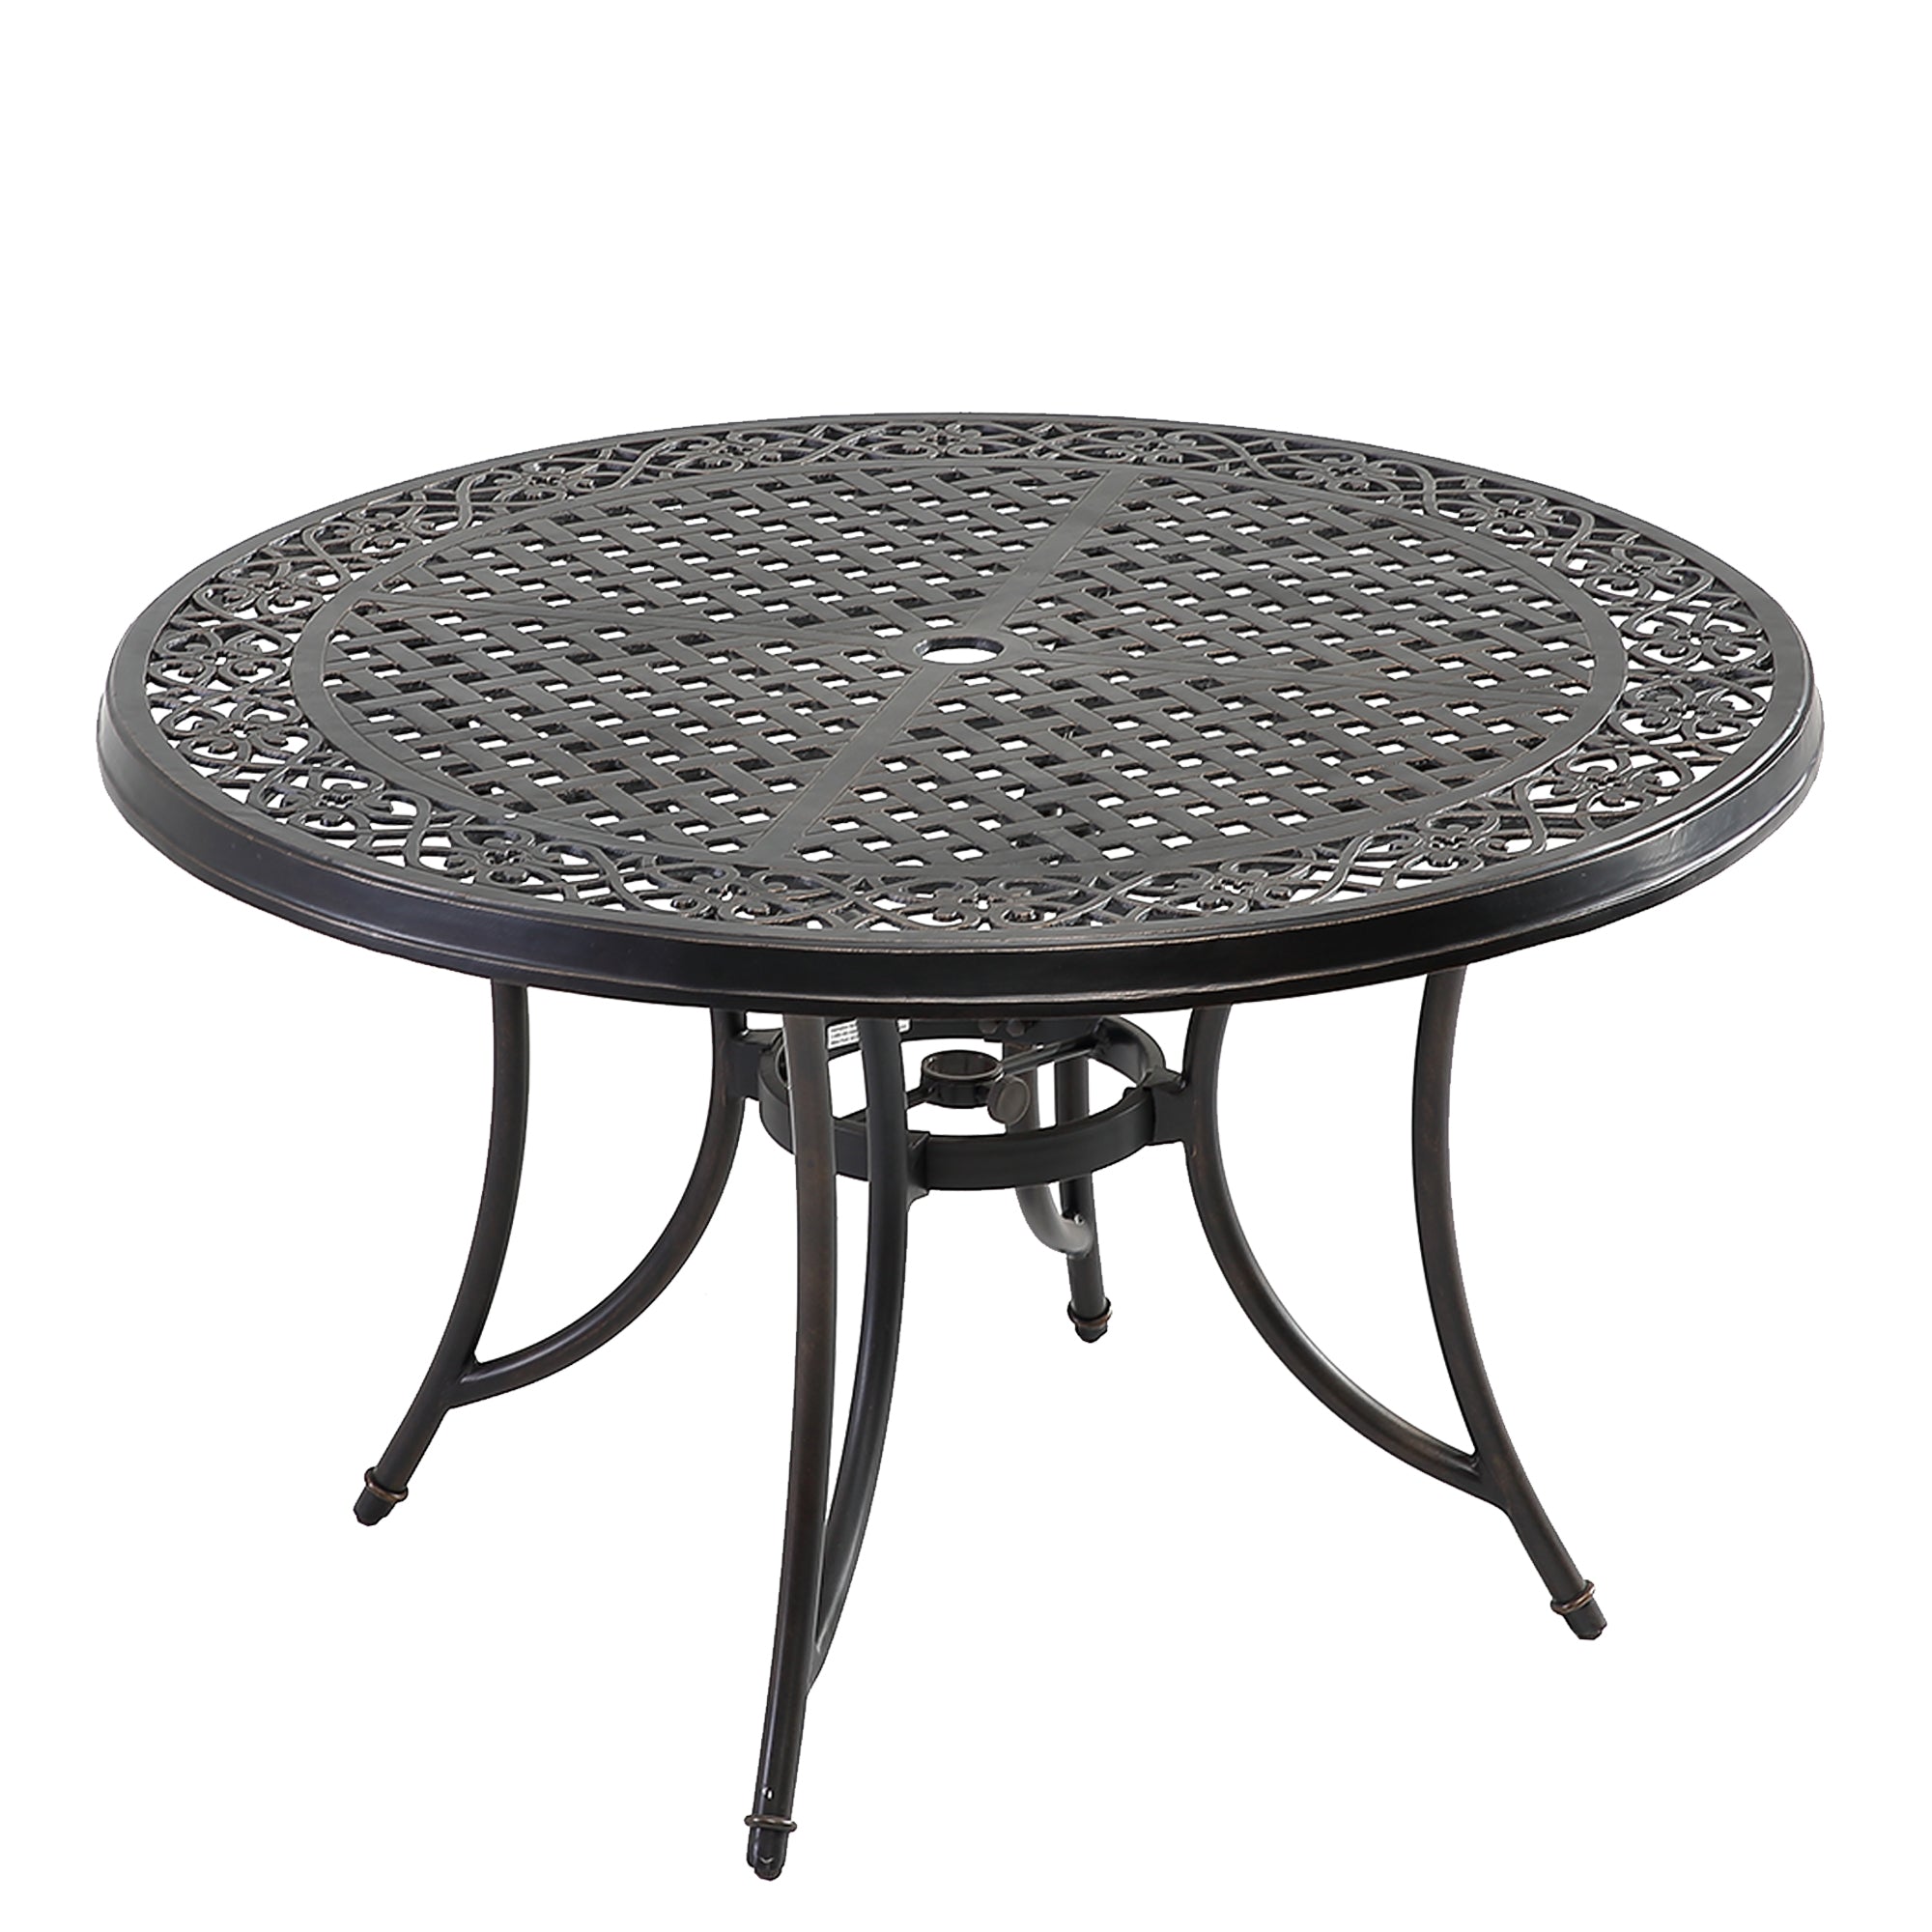 Round Cast Aluminum Dining Classic Pattern Table with Umbrella Hole